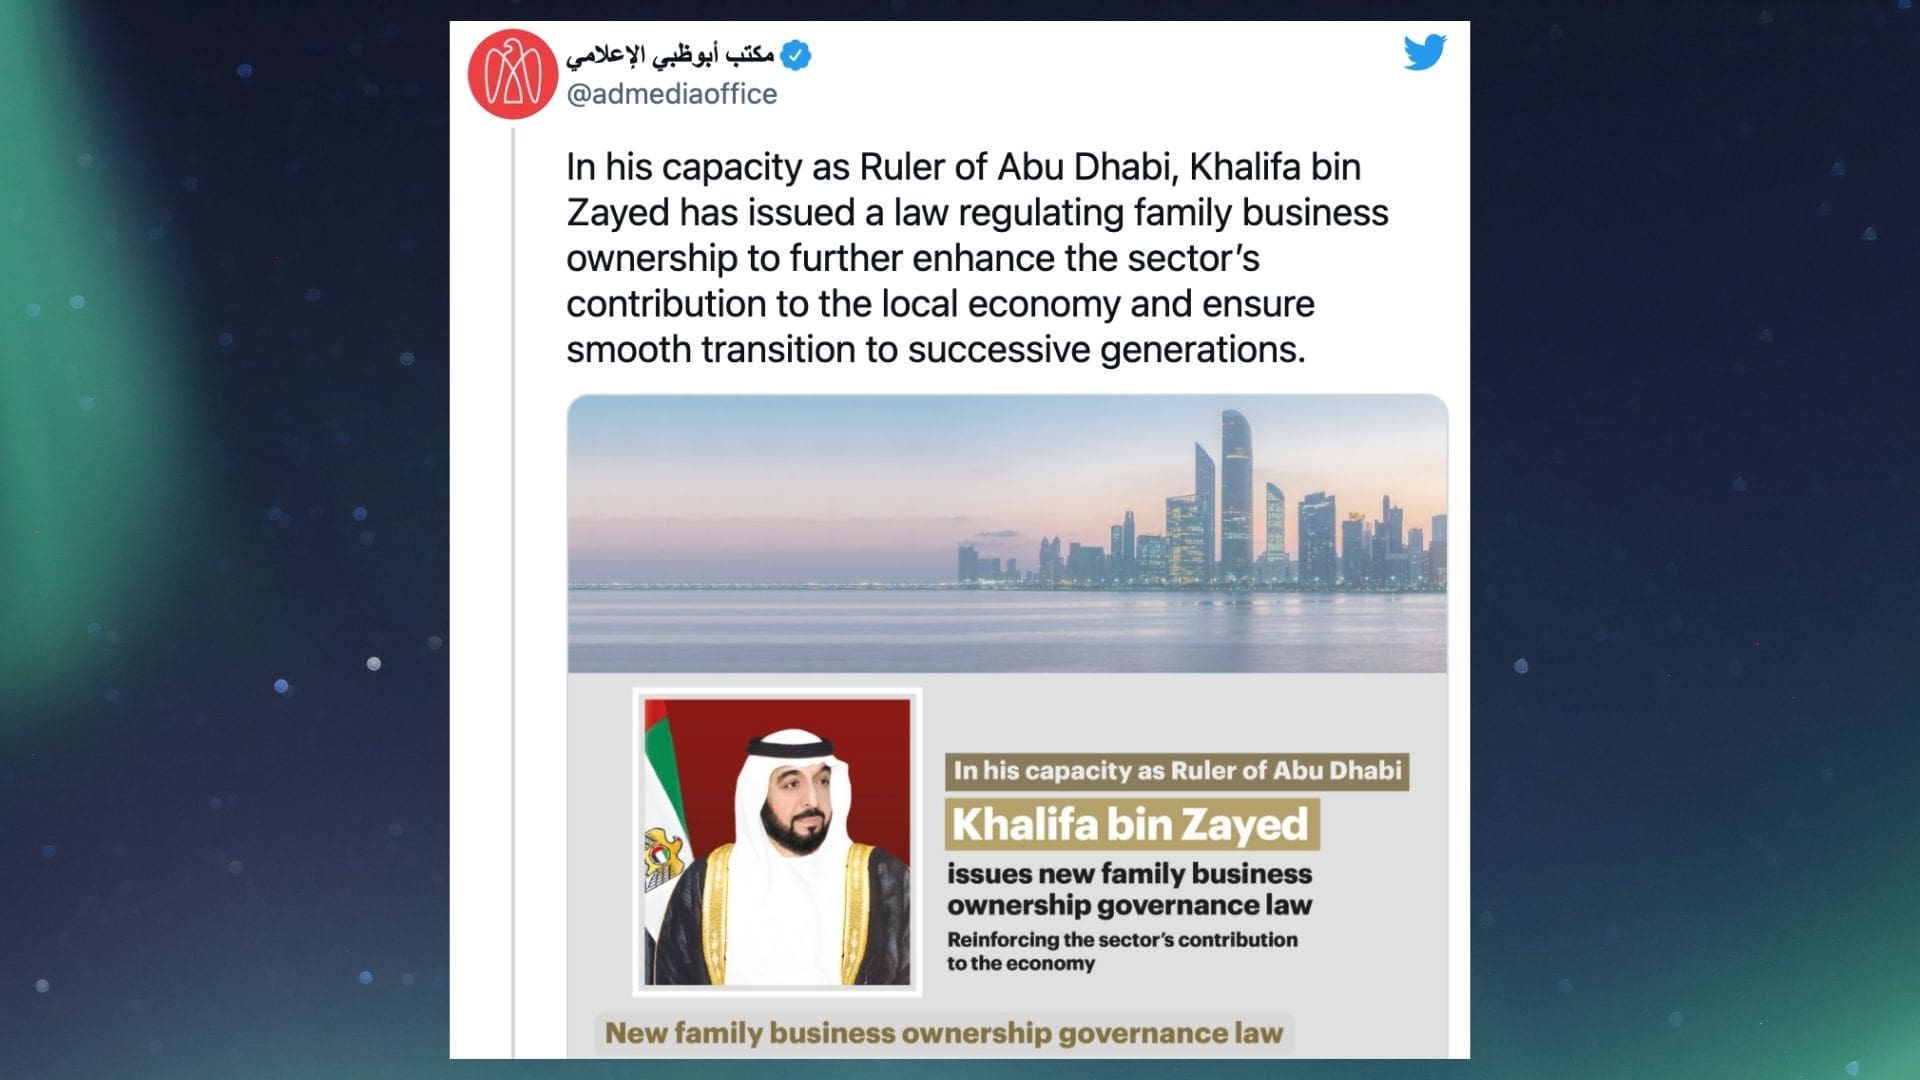 Abu Dhabi Media Office tweet about new family businesses ownership governance law25/01/22